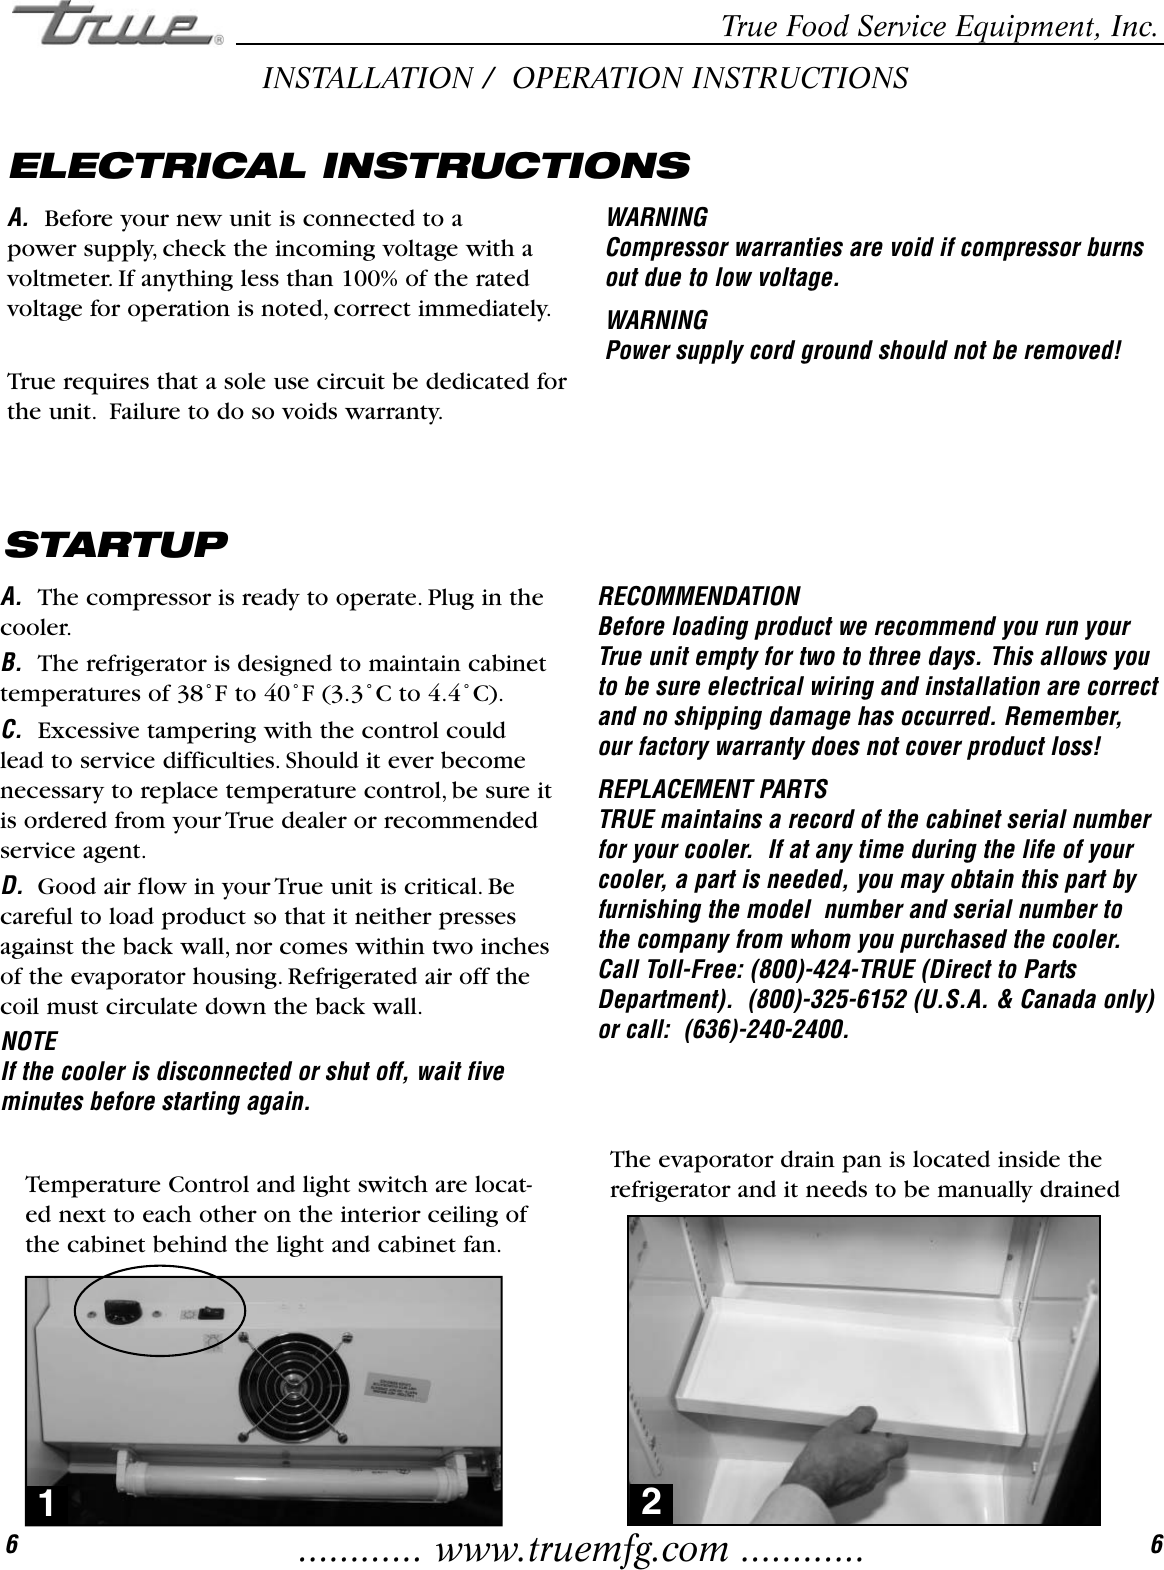 Page 7 of 12 - True-Manufacturing-Company True-Manufacturing-Company-Gdm-3-Users-Manual- GDM-3 Manual  True-manufacturing-company-gdm-3-users-manual